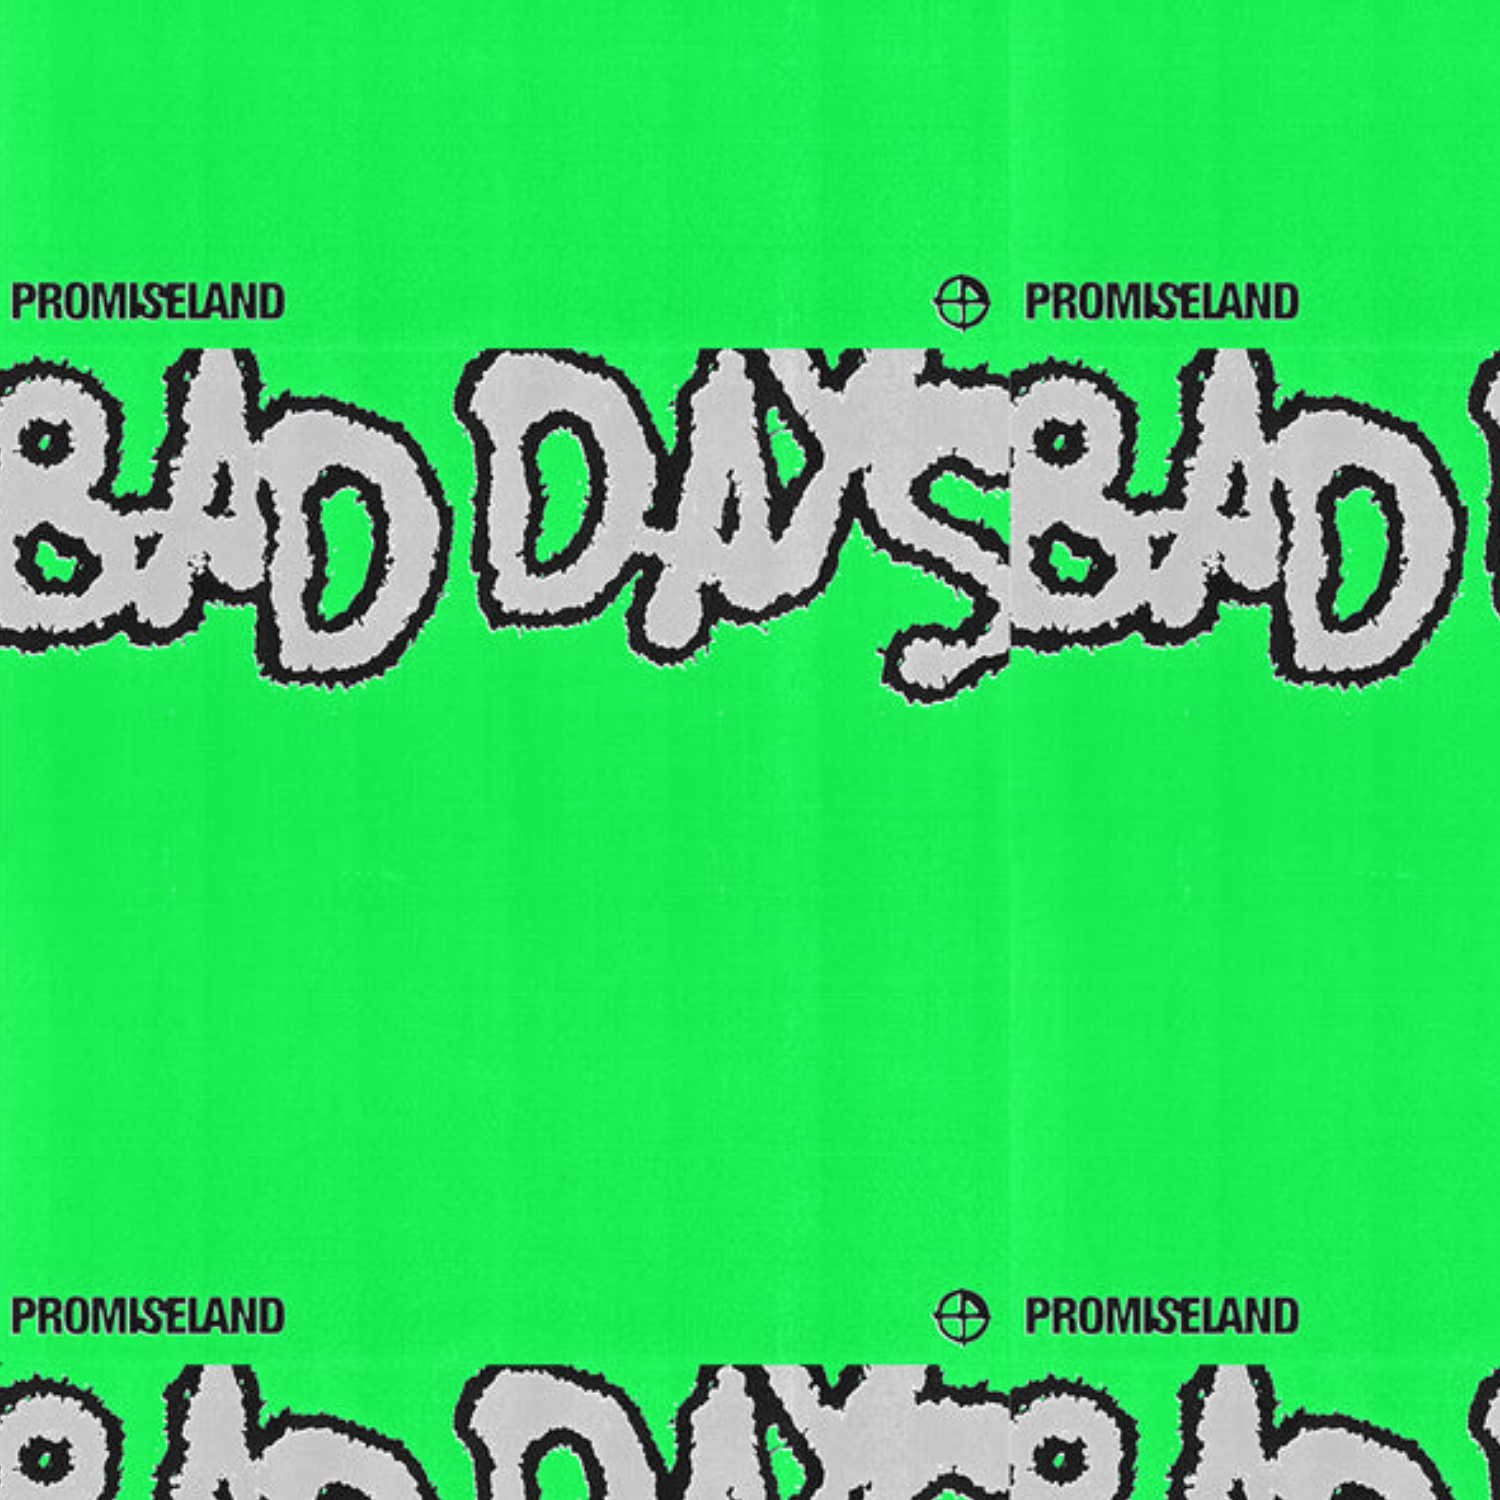 Cover image for Promiseland drops 'Bad Days' from debut album 'Sad But Happy', set for release on Oct 20th on Julian Casablancas' Cult Records.